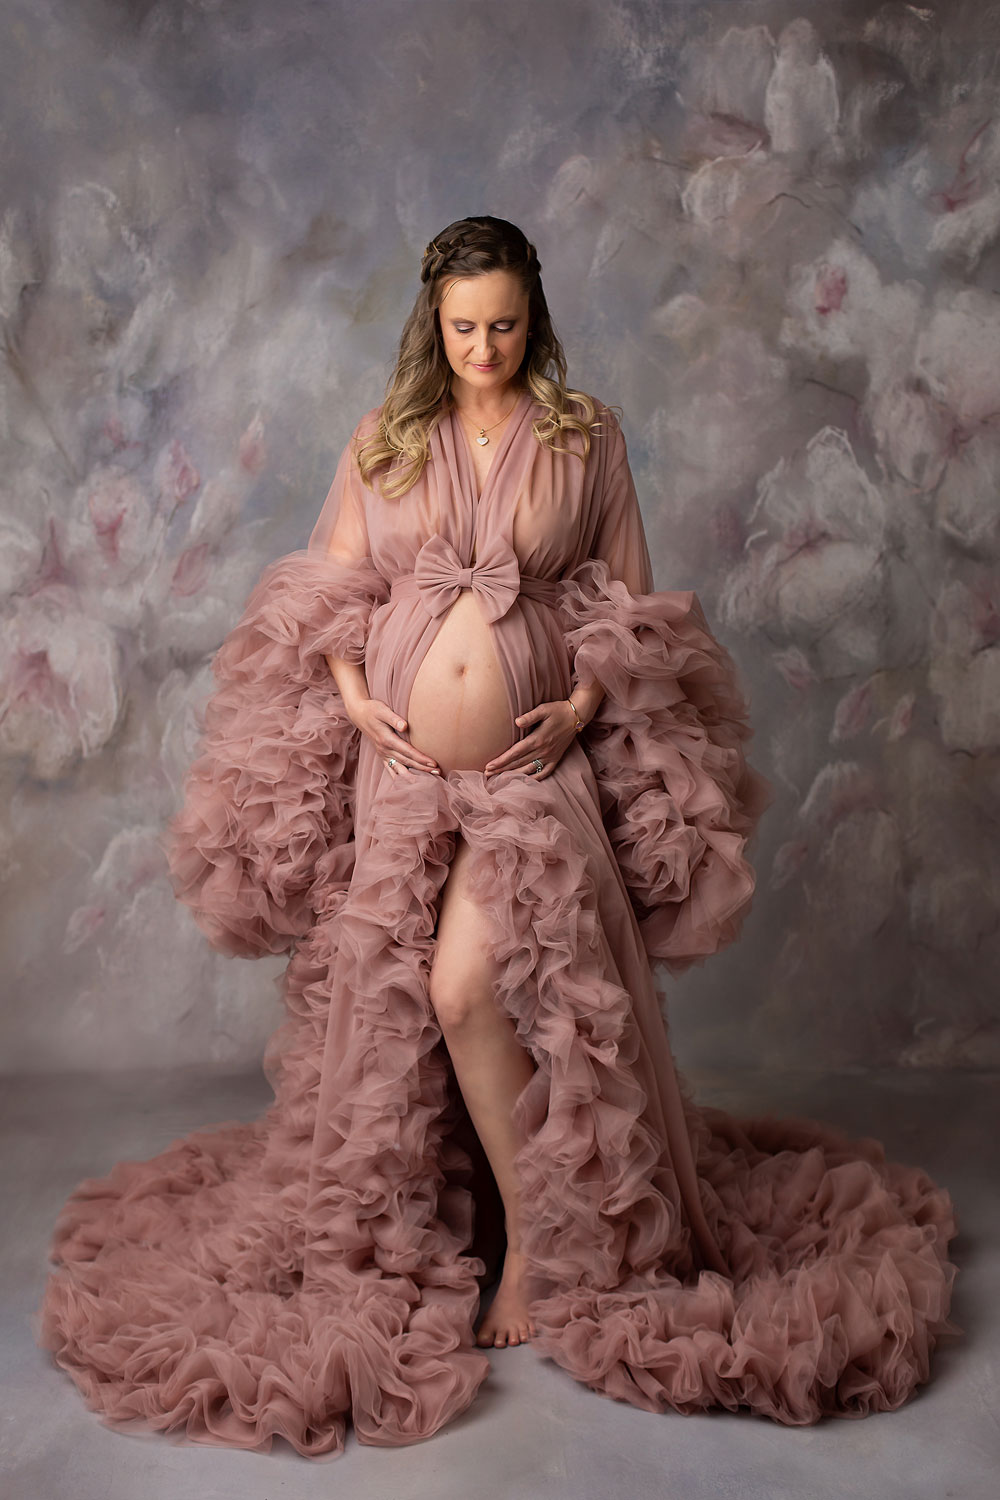 pregnany-woman-with-ruffle-dress